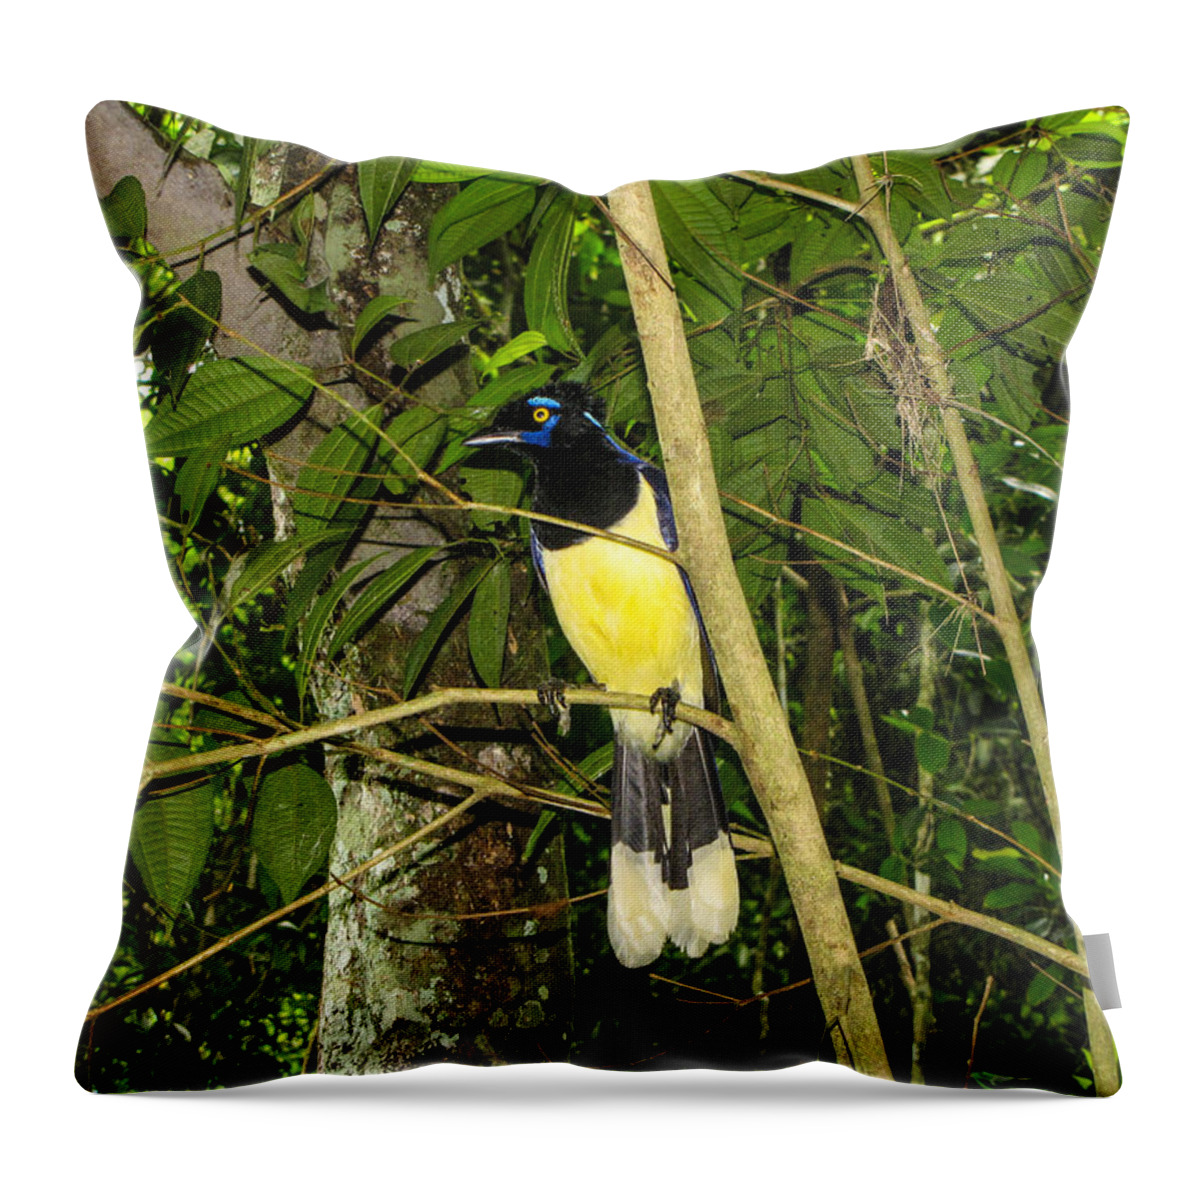 Plush-crested Throw Pillow featuring the photograph Plush-crested Jay by David Gleeson